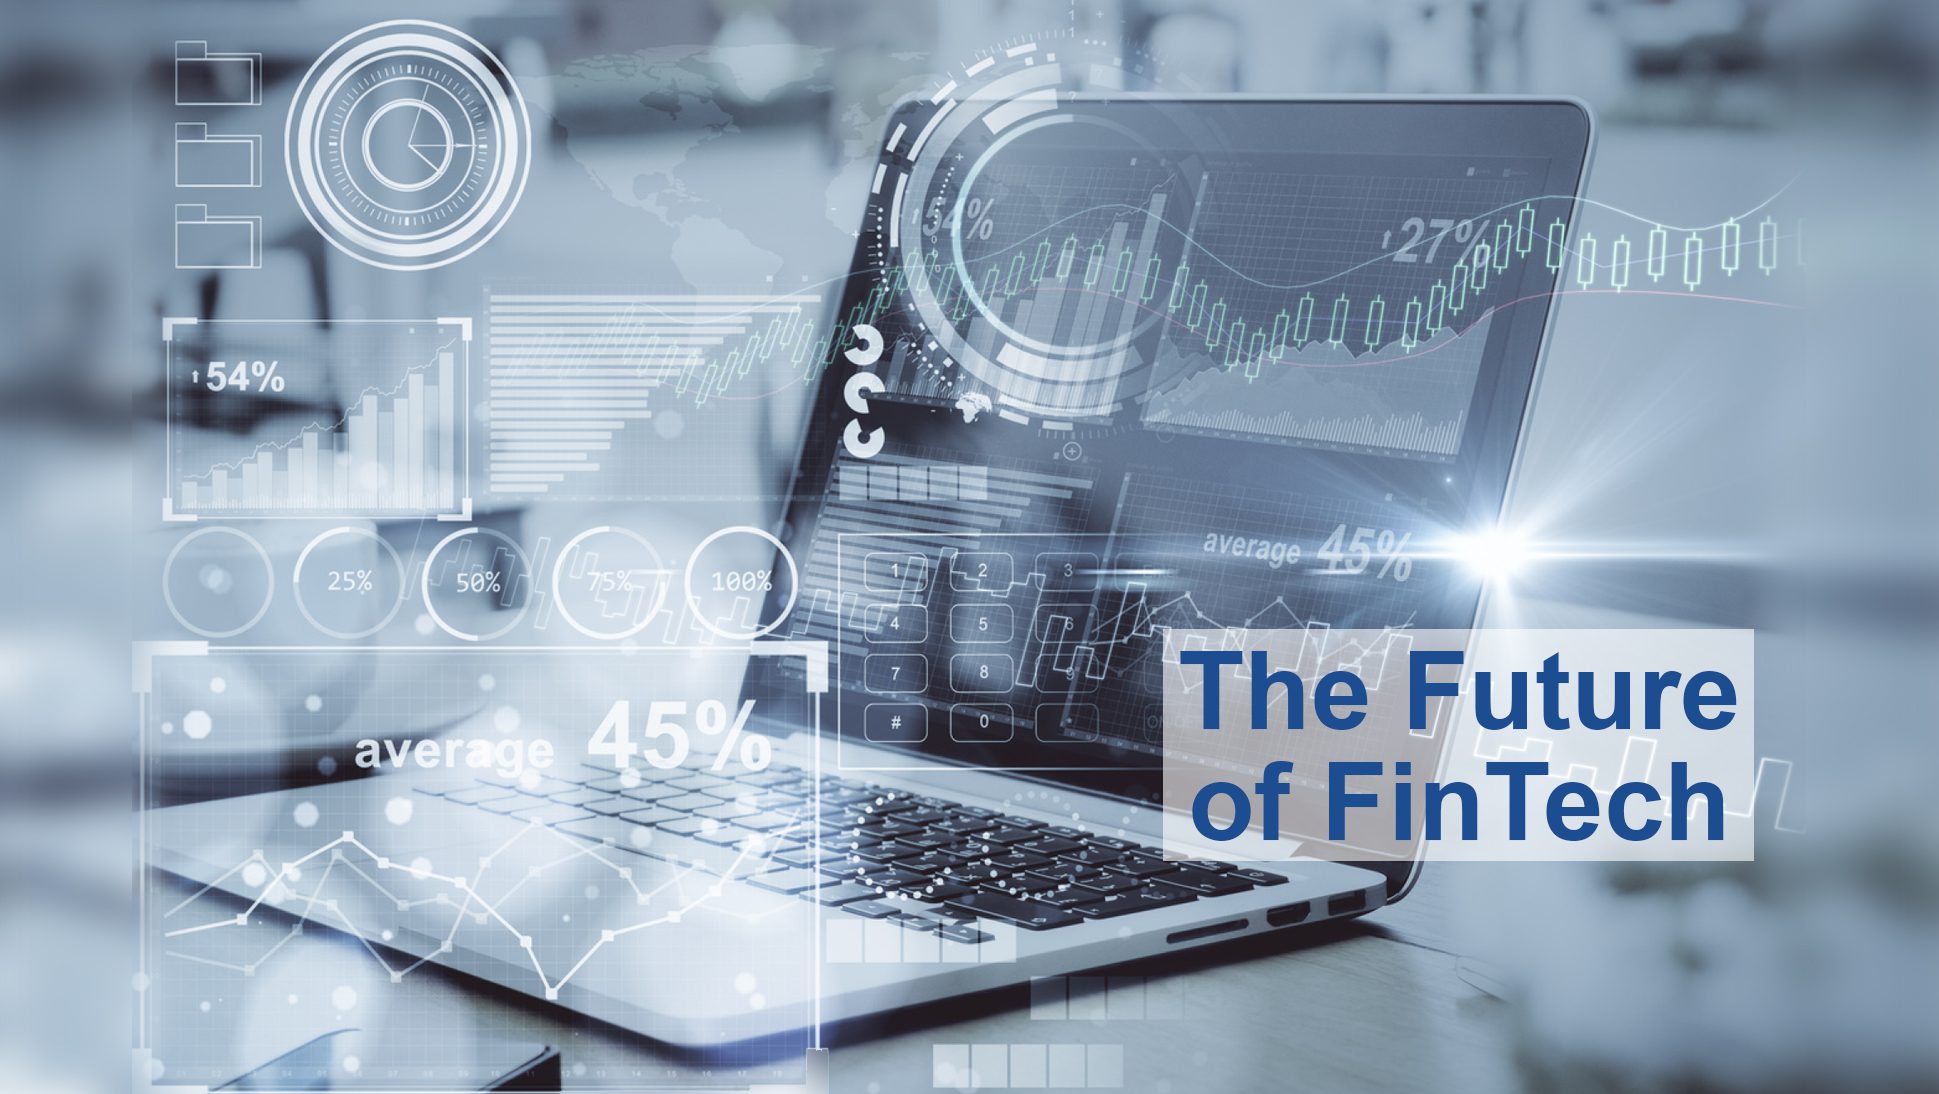 The cover image of a blog with a Forex market chart hologram and a personal laptop background illustrates the Future of Fintech.